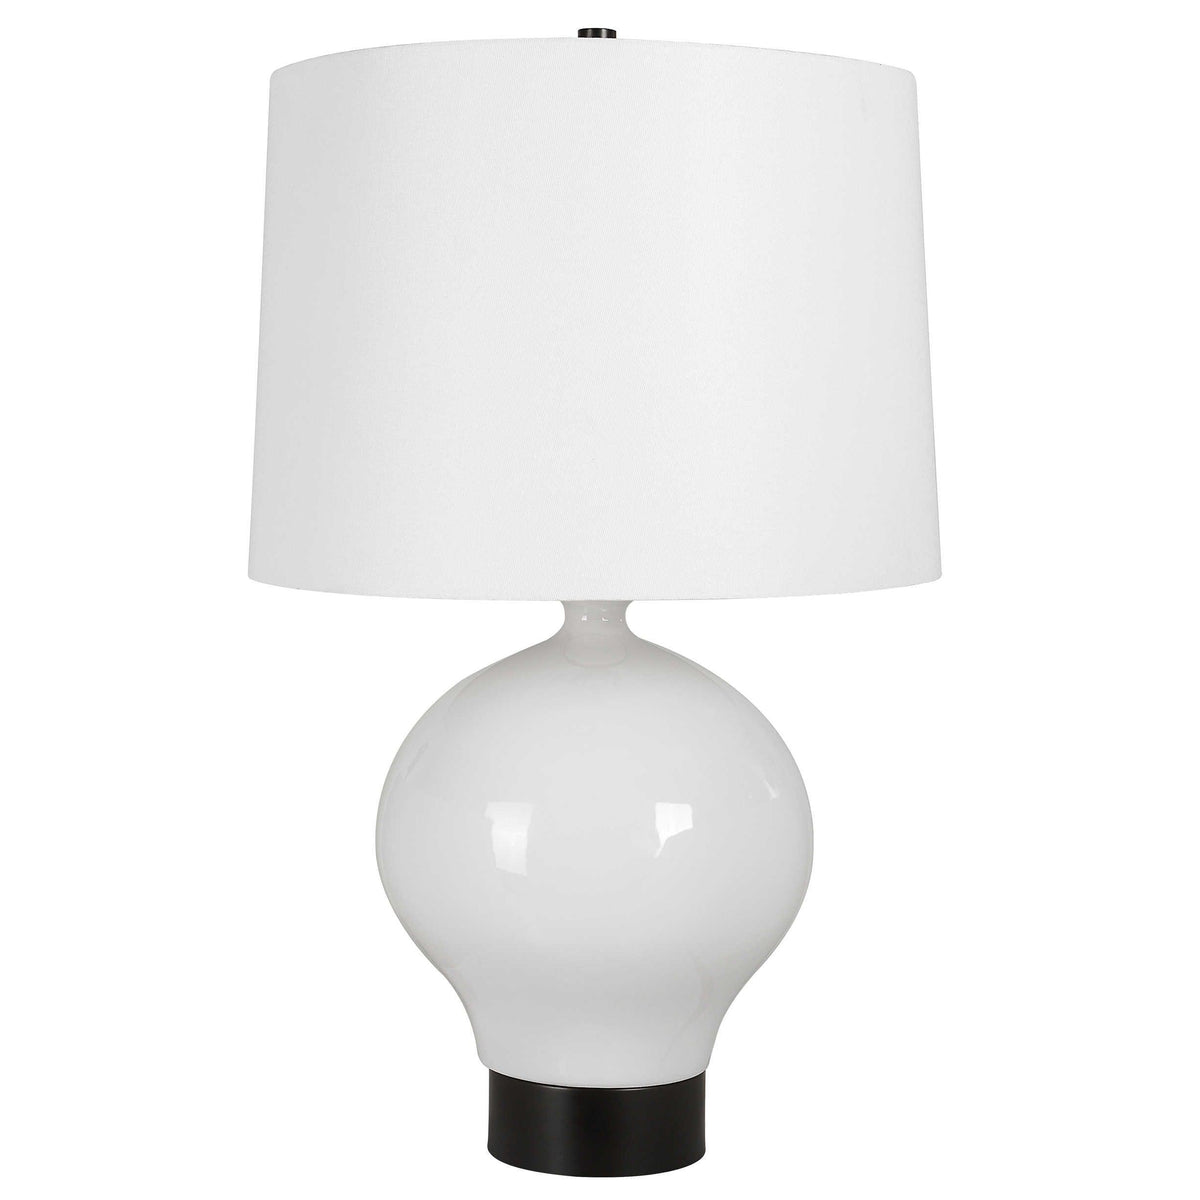 The Uttermost - Collar Table Lamp - 30182-1 | Montreal Lighting & Hardware